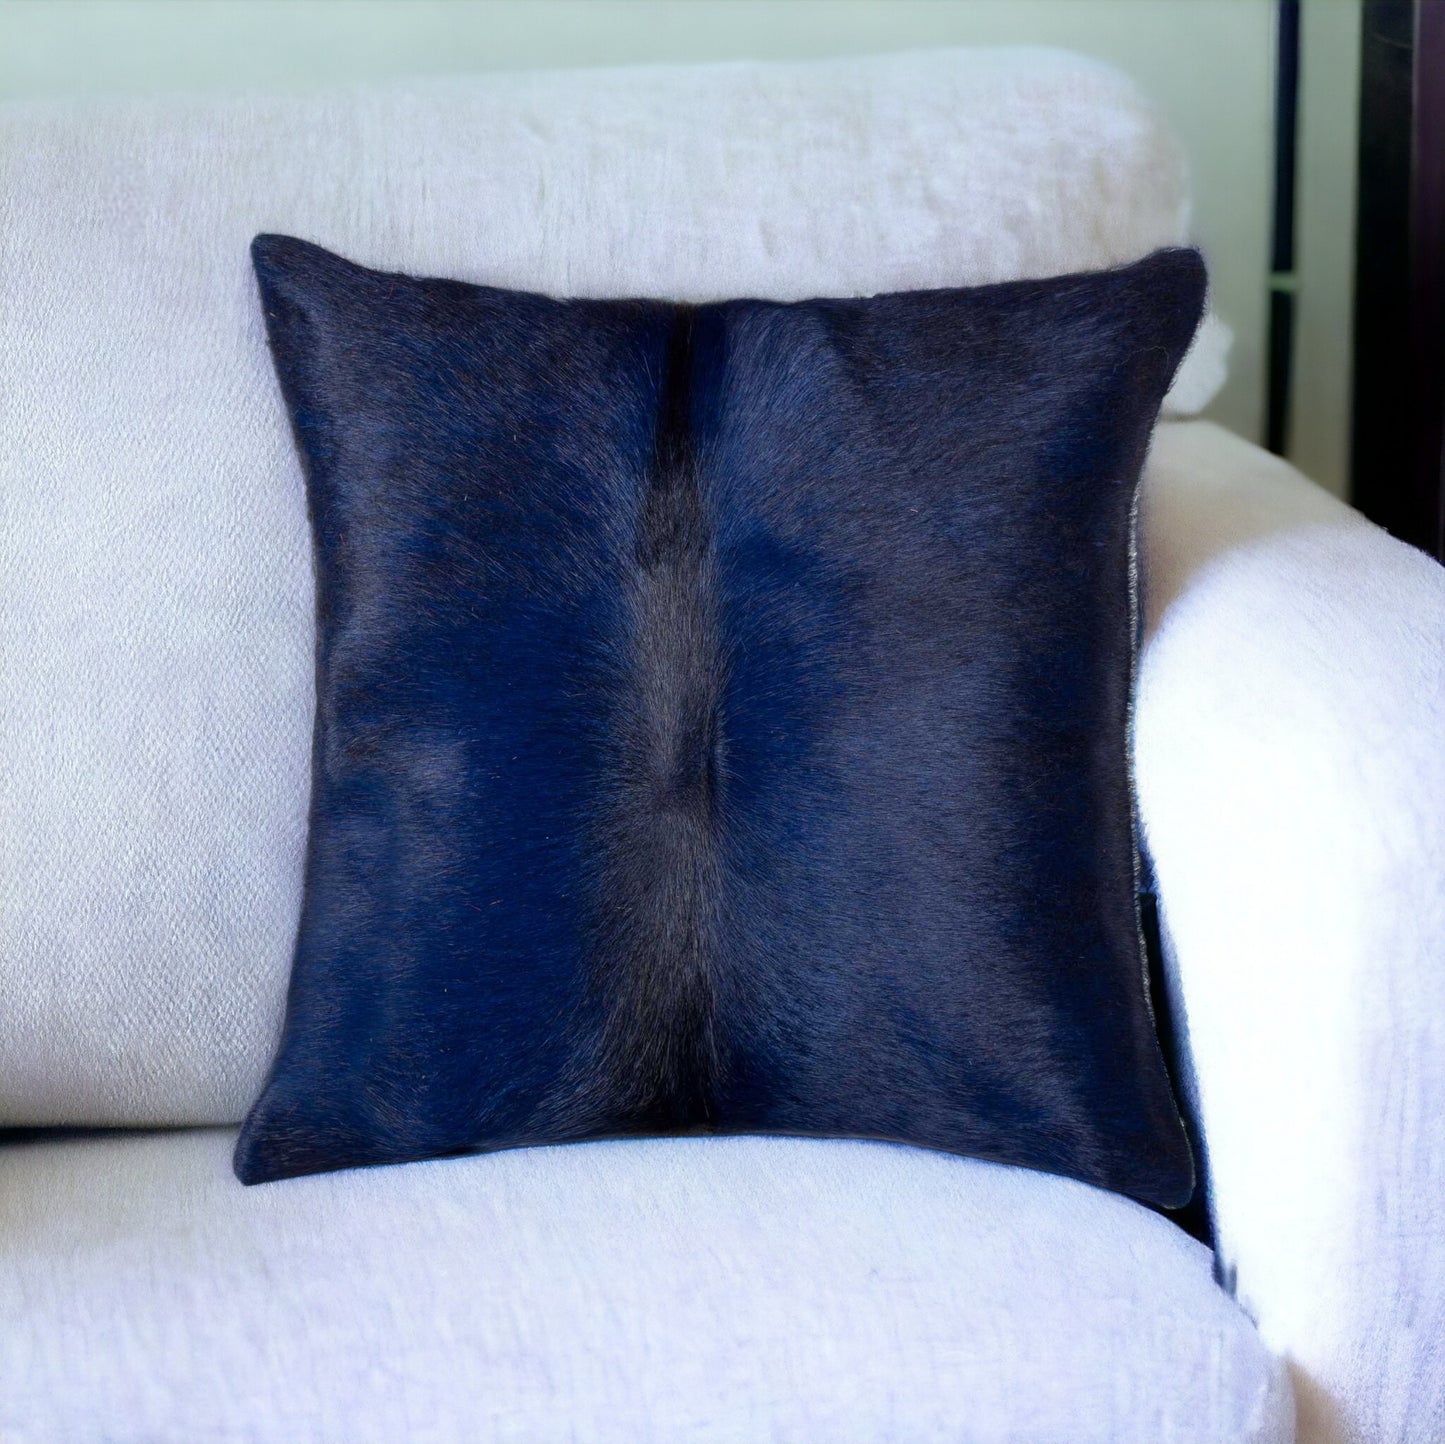 18" Navy Cowhide Throw Pillow